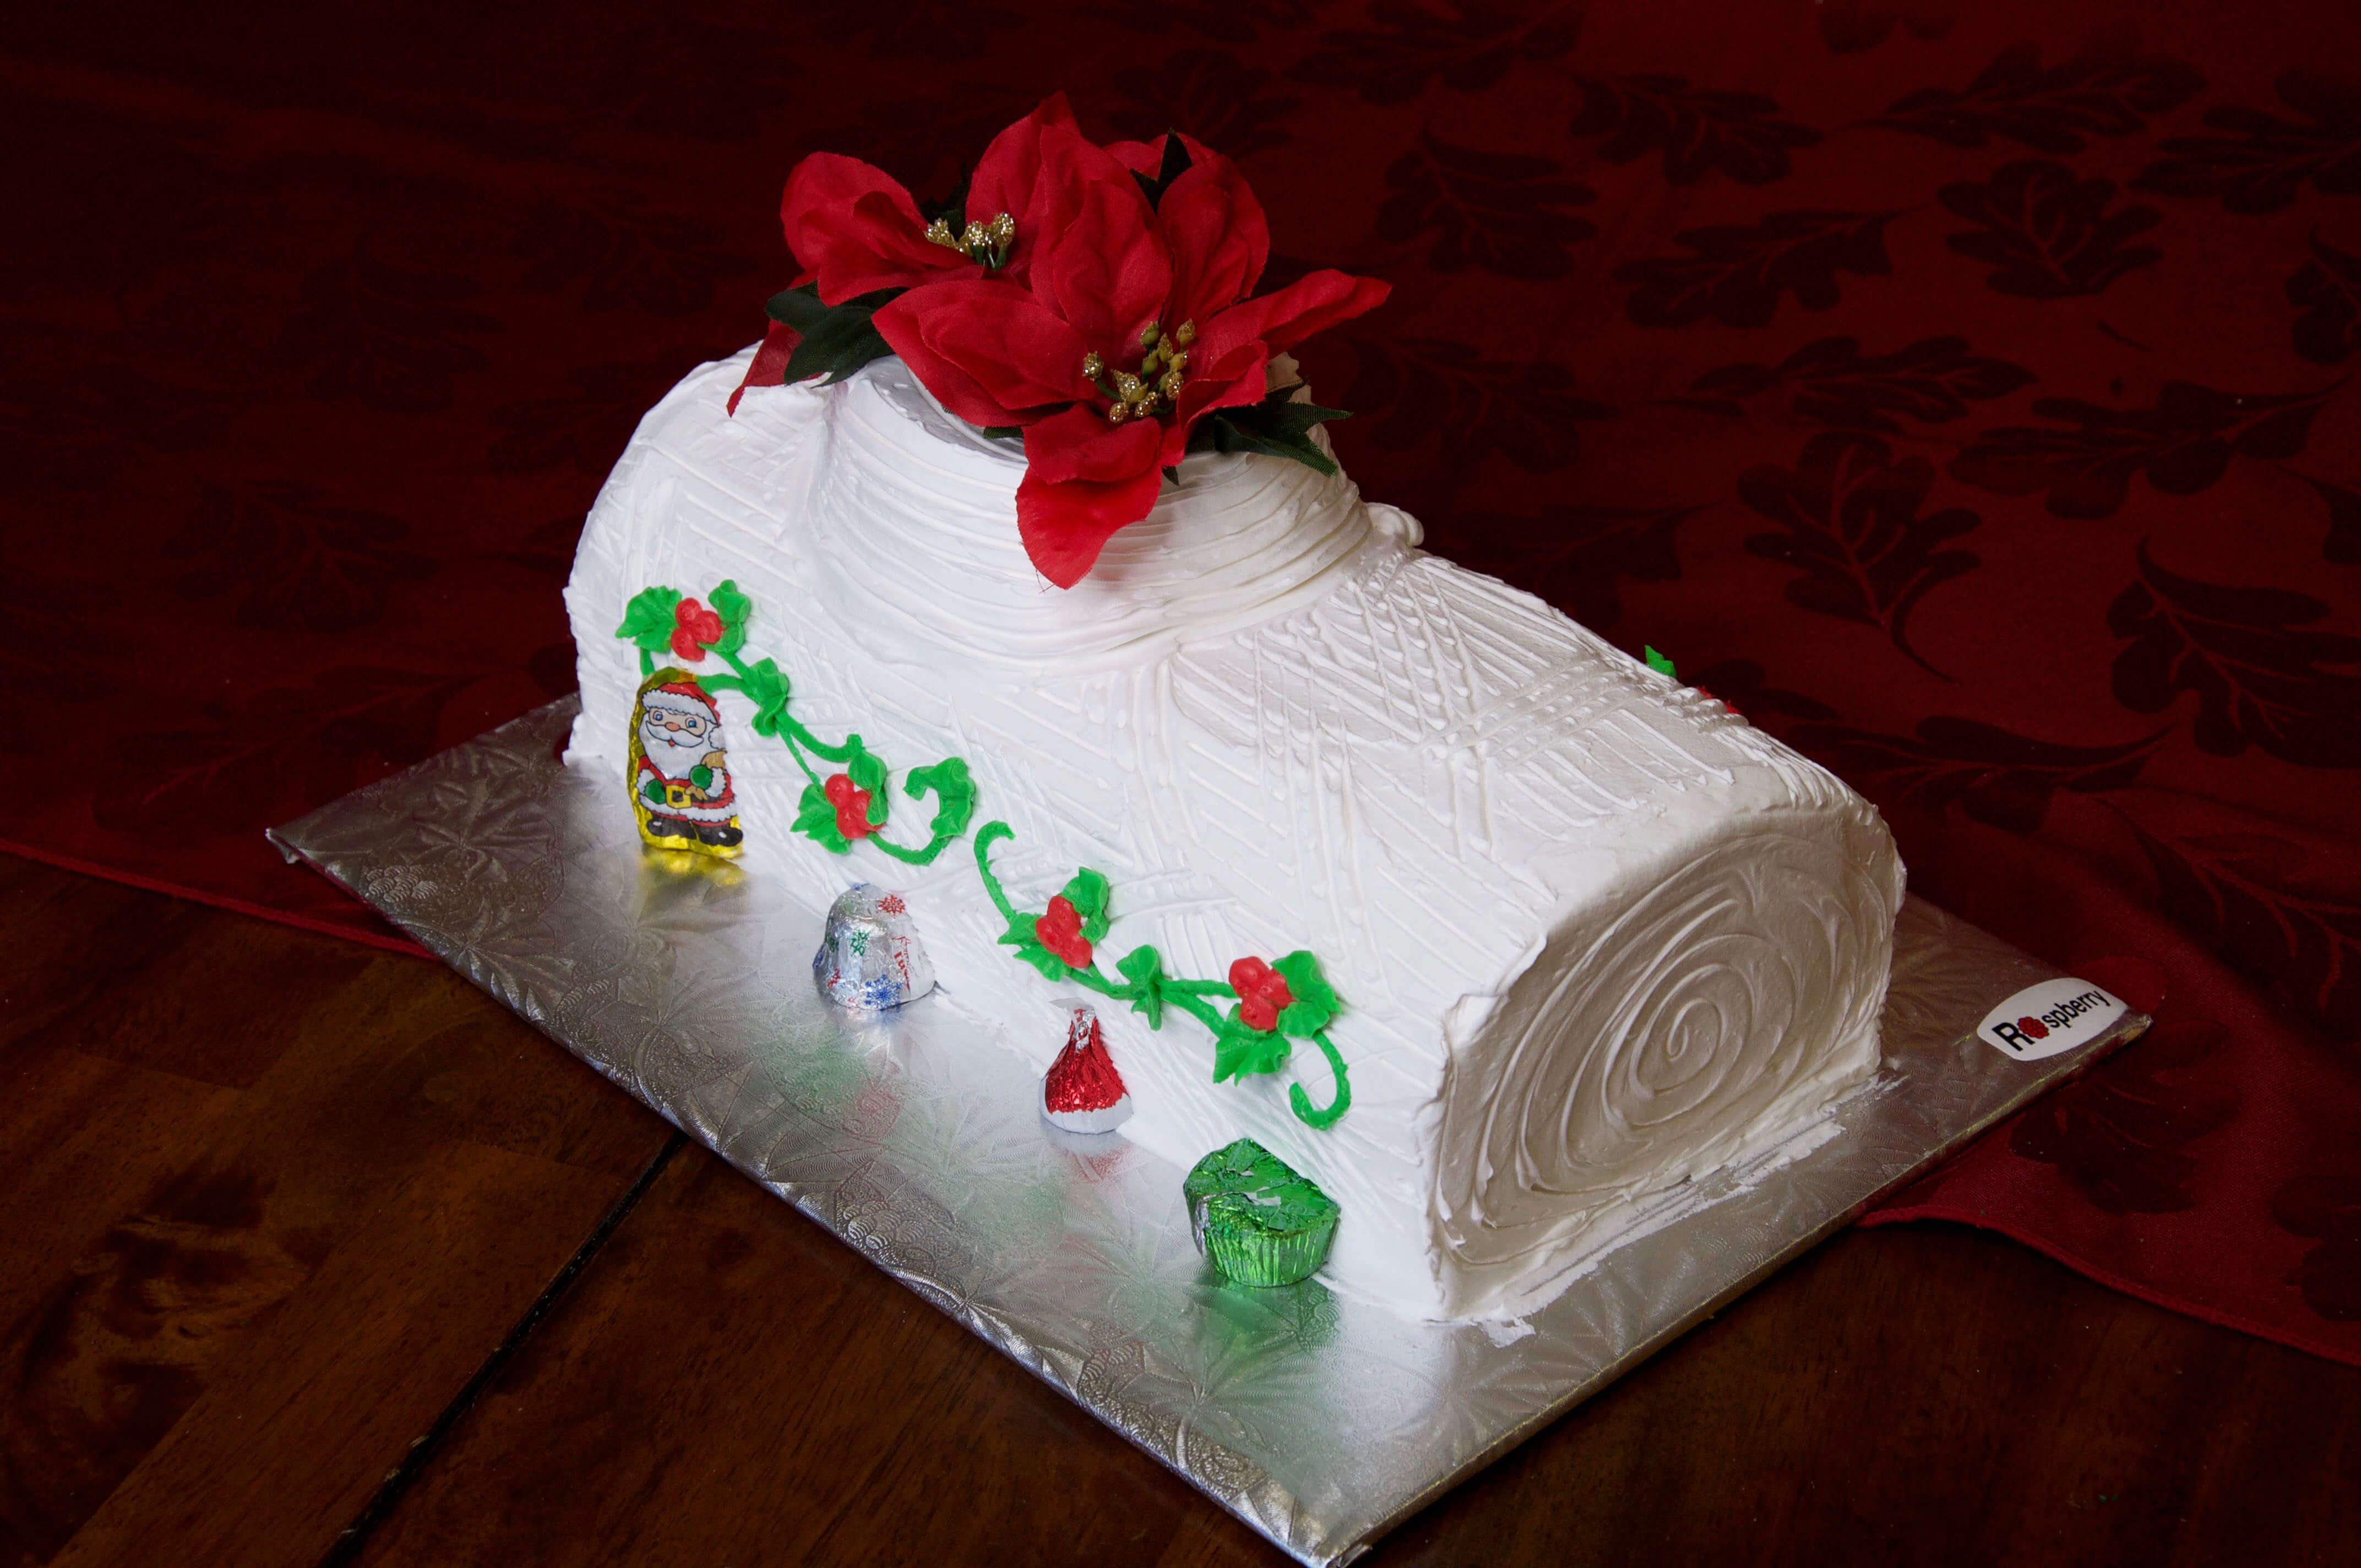 Classic Yule Log with White Icing